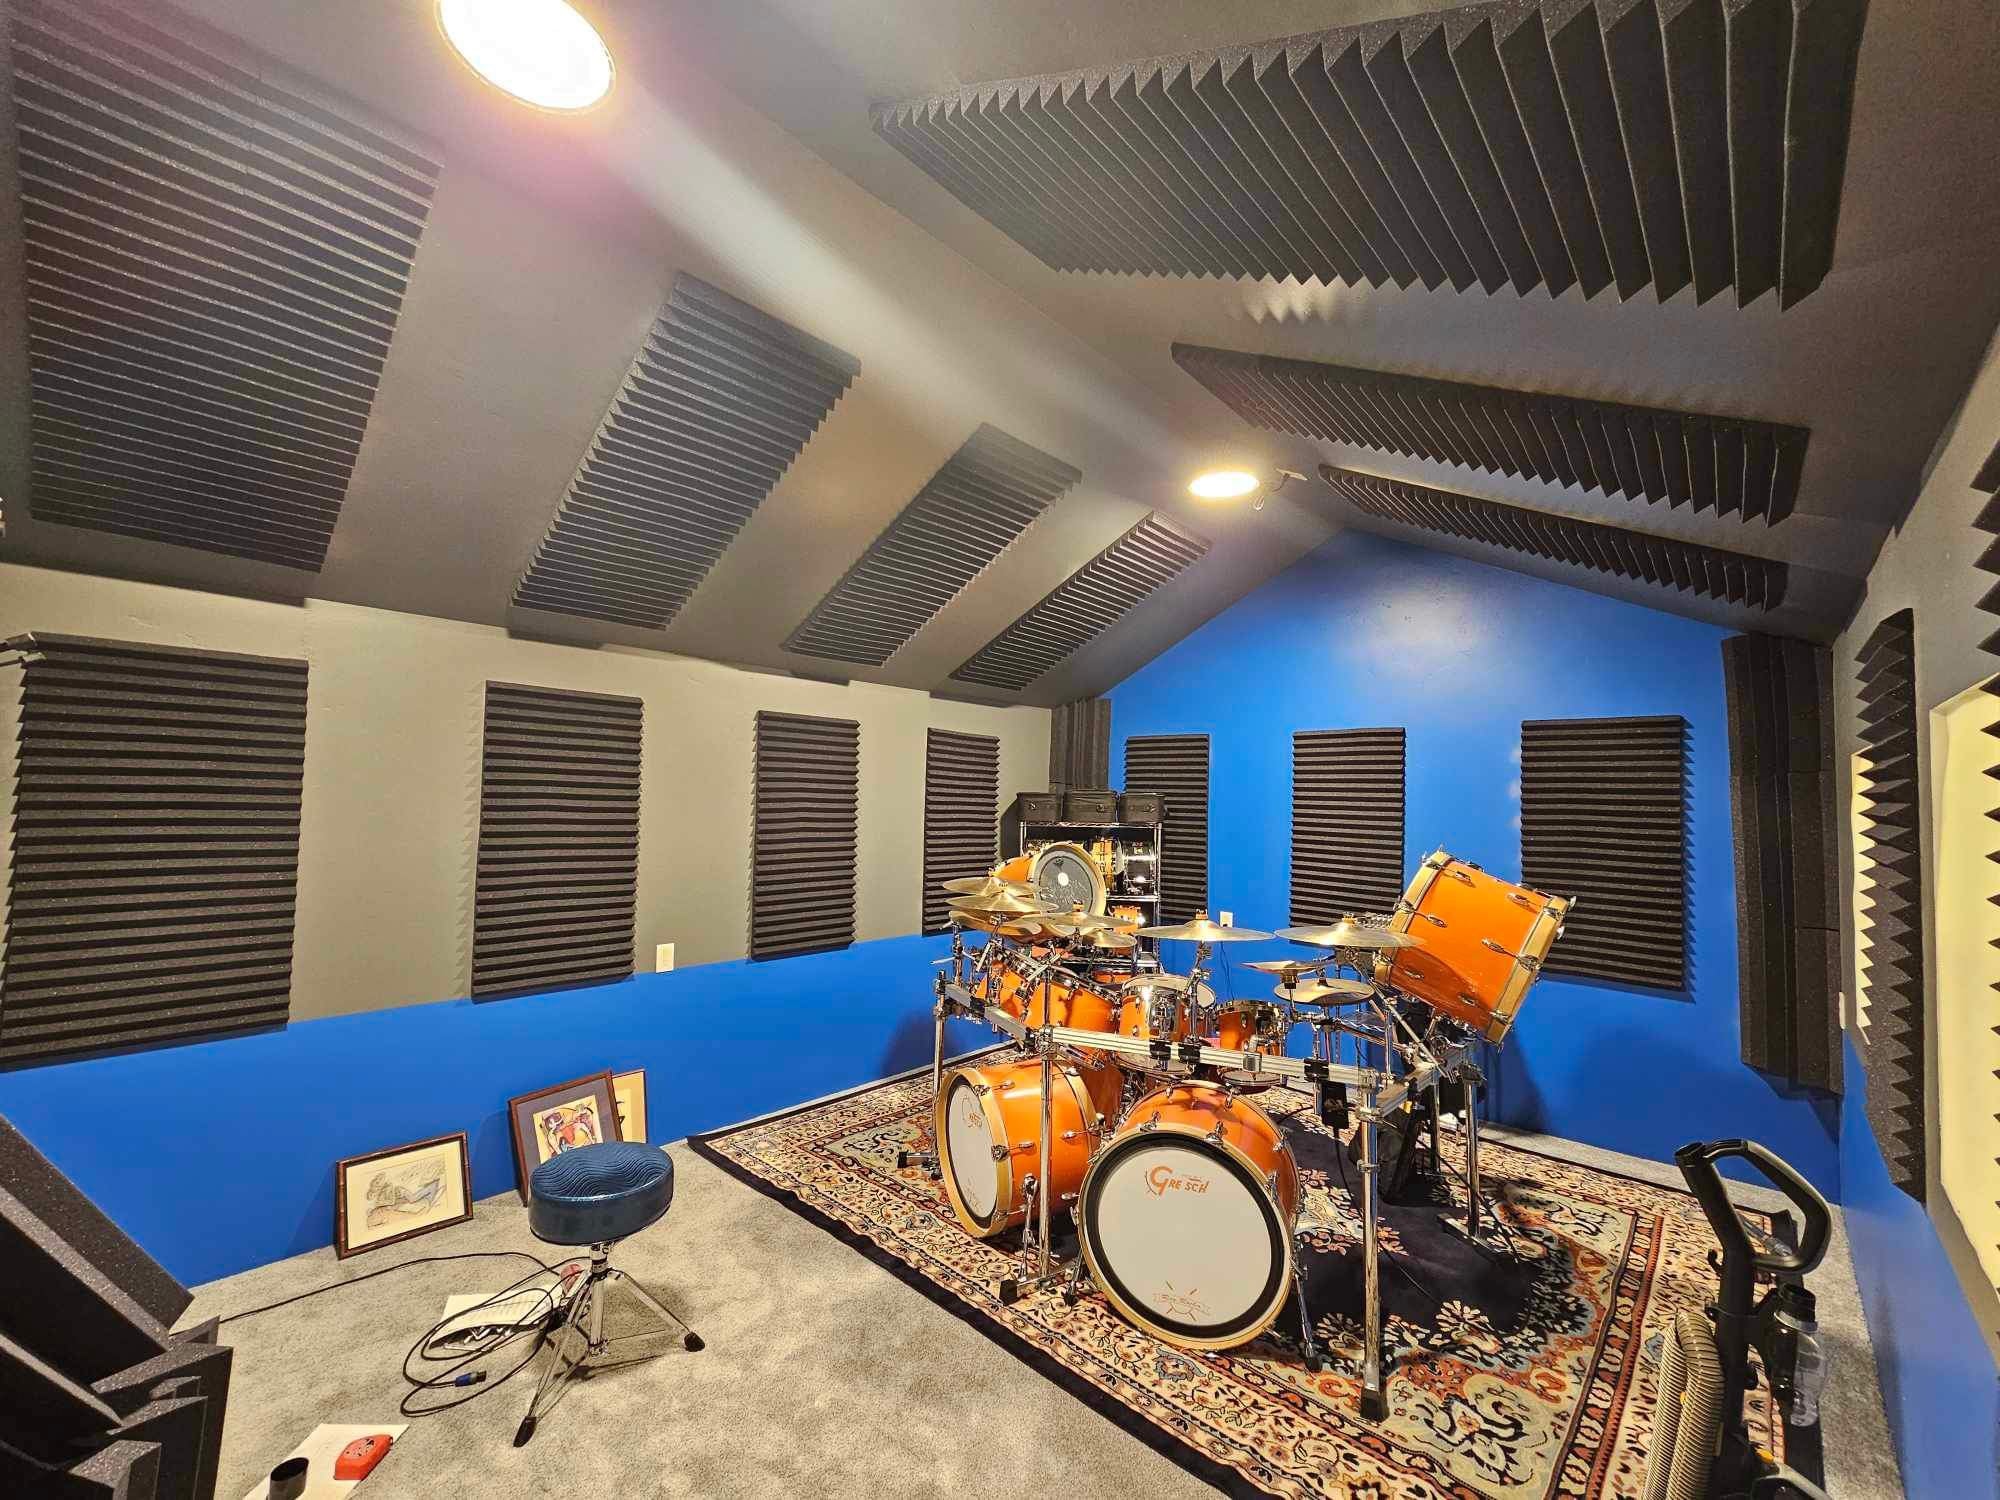 Consulting - Advice on What Acoustic Treatment You Need for Your Room! (CREDIT TOWARDS PURCHASE OF PRODUCTS)